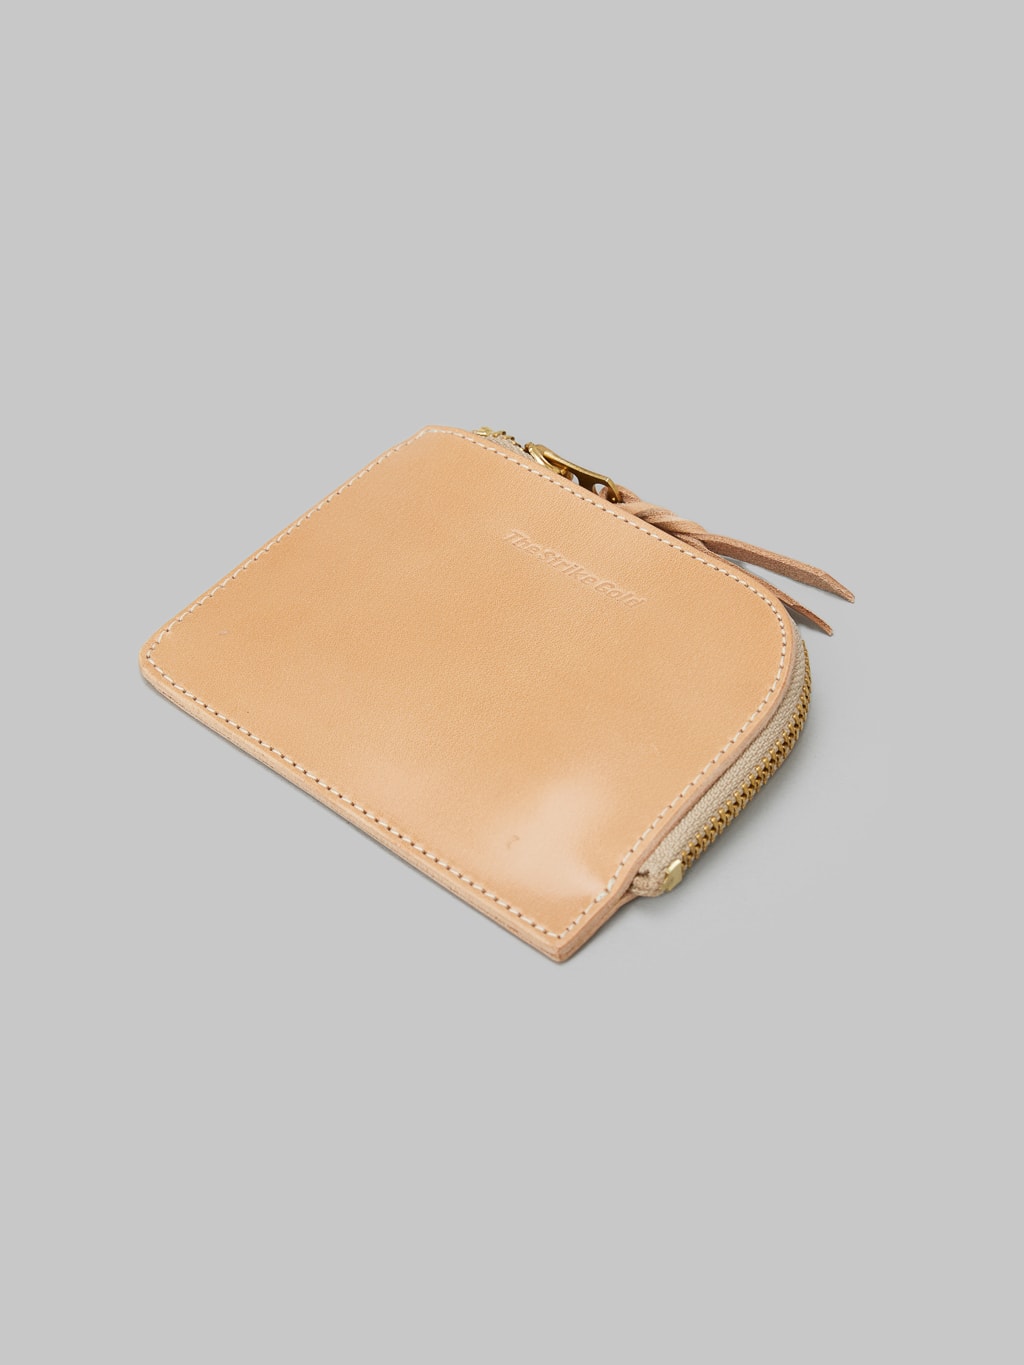 The Strike Gold Italian Leather Zip Wallet Natural